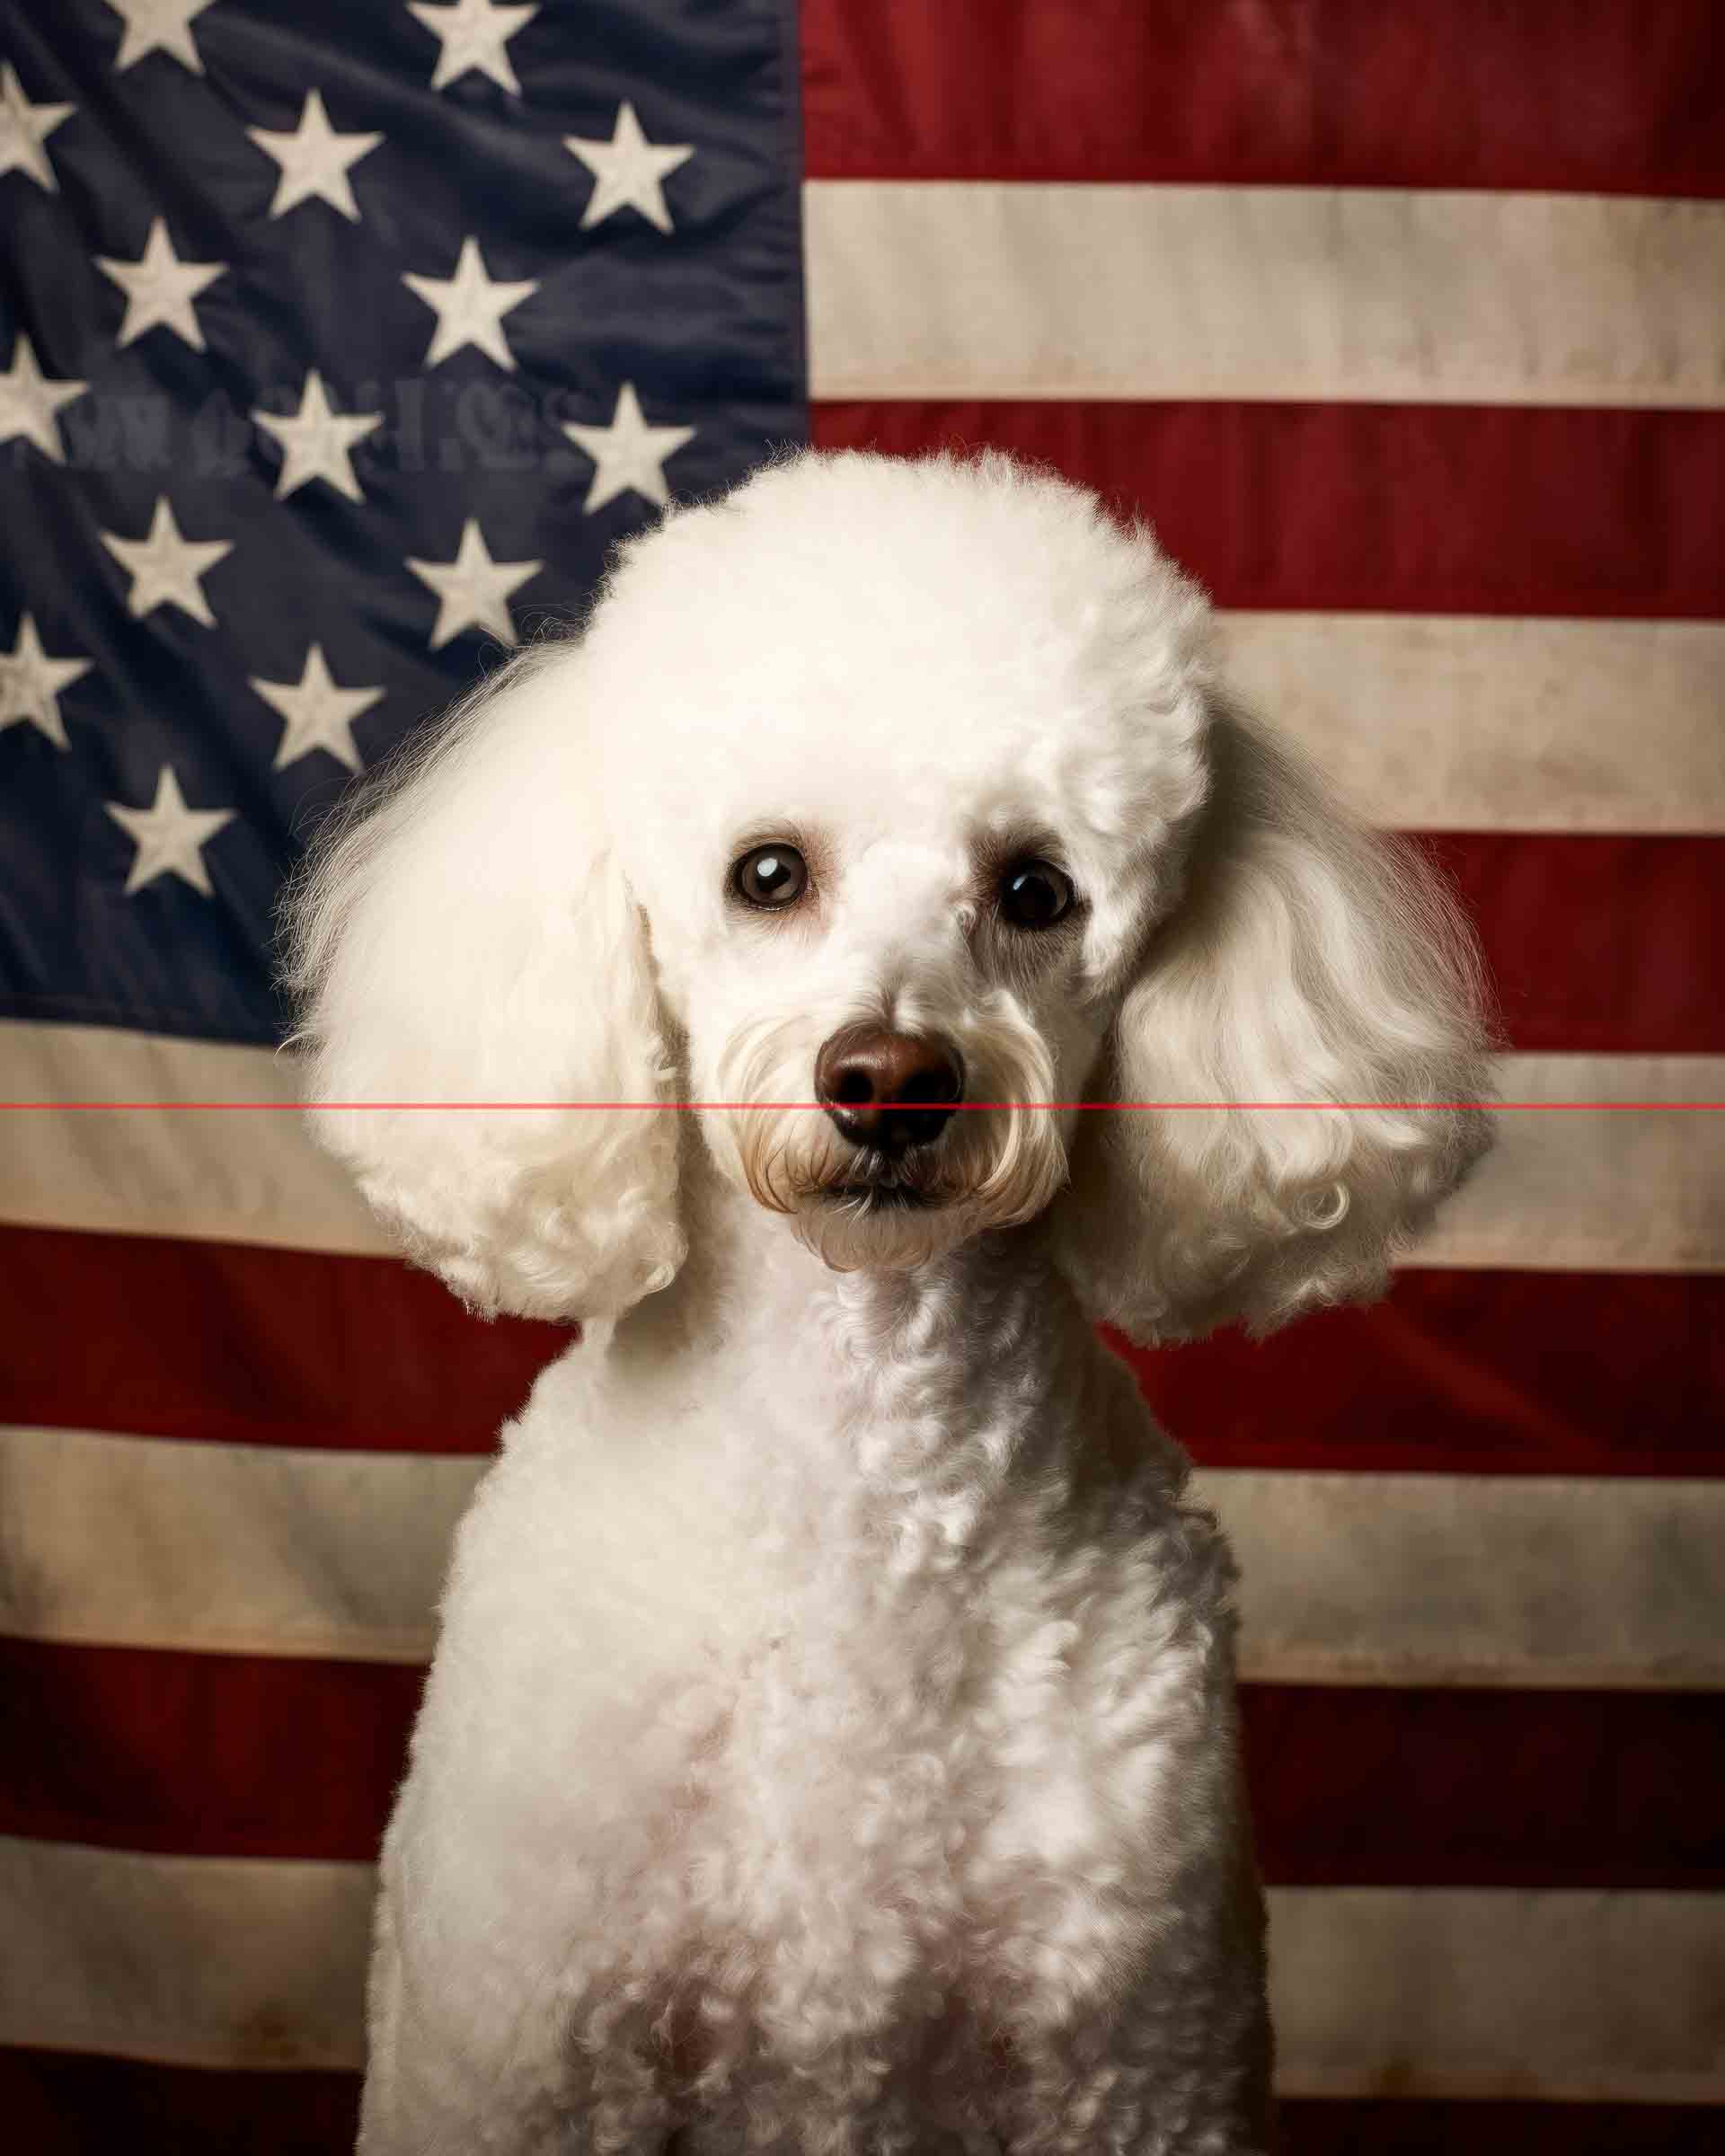 A white toy poodle with a fluffy coat and iconic groom sits in front of an american flag, looking directly at the viewer with an attentive expression.